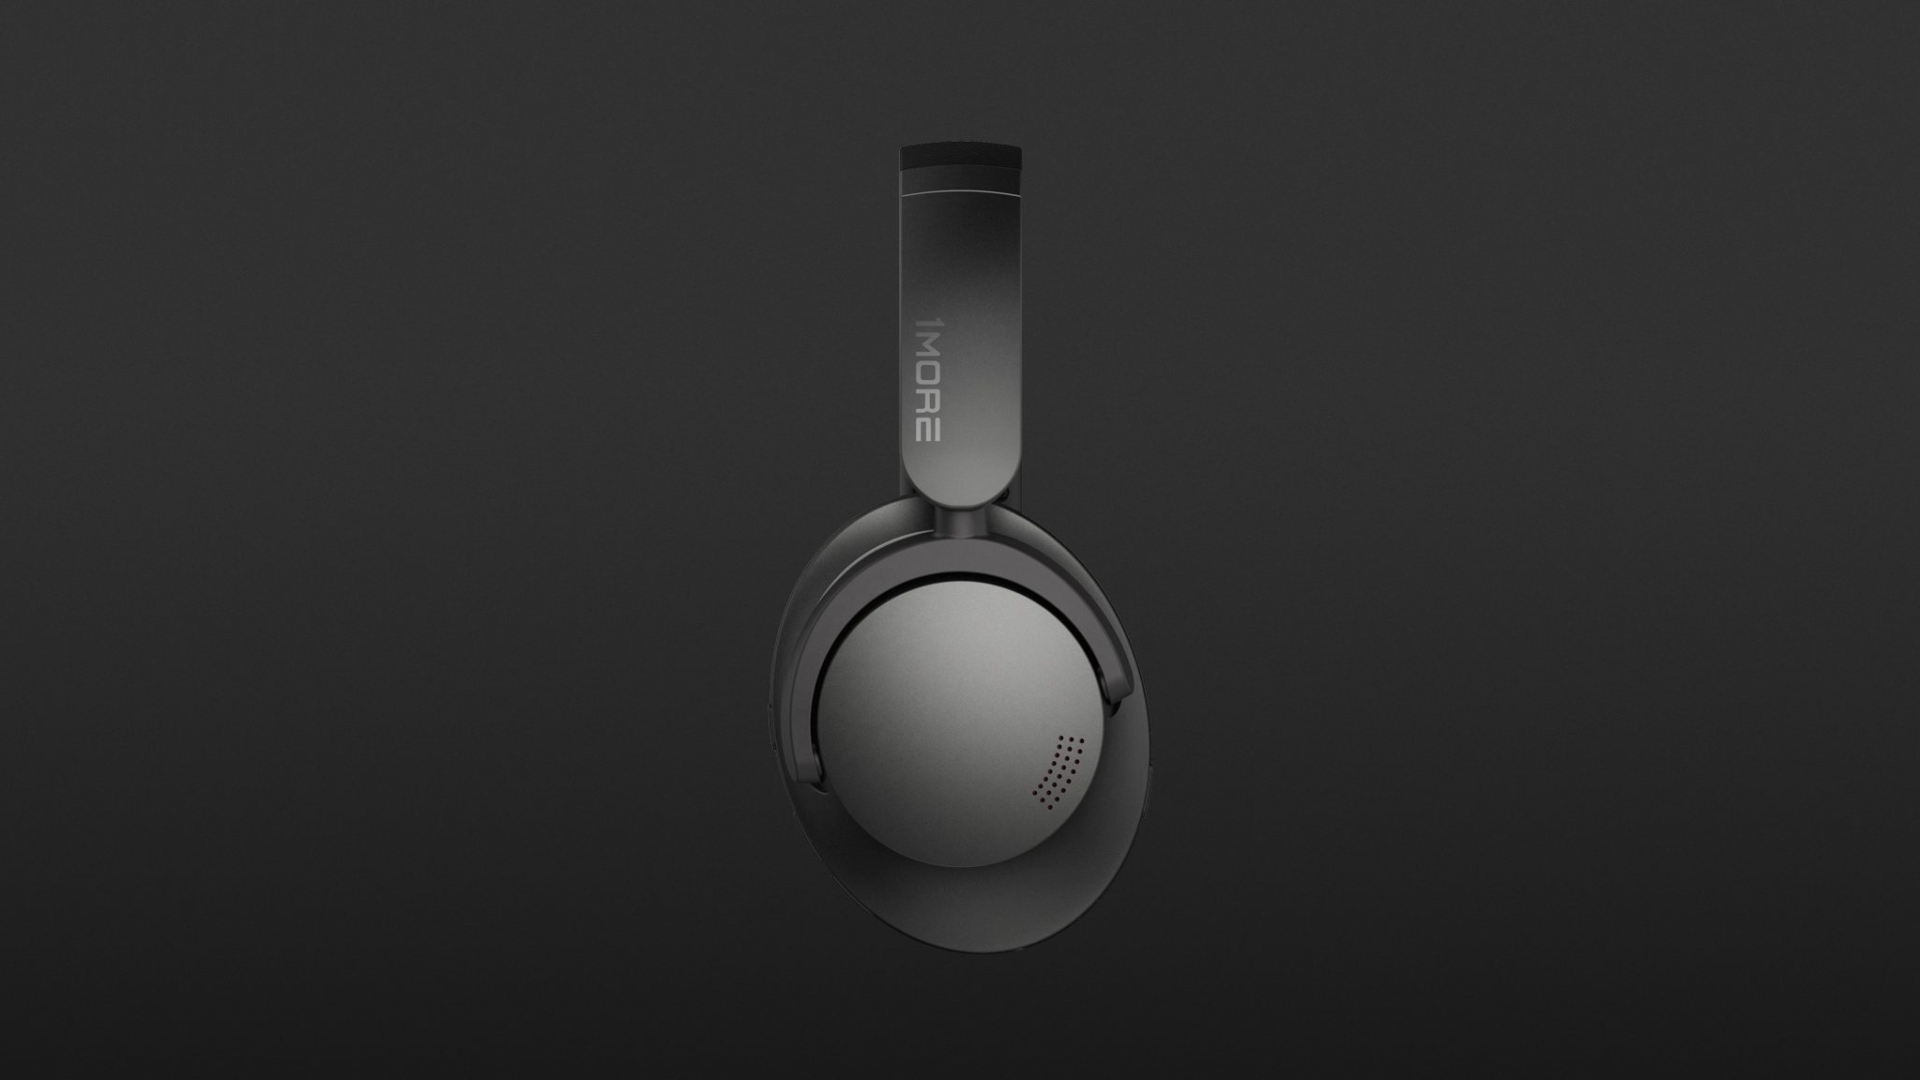 1More SonoFlow - An Entry-Level Headphone with good ANC, Bluetooth